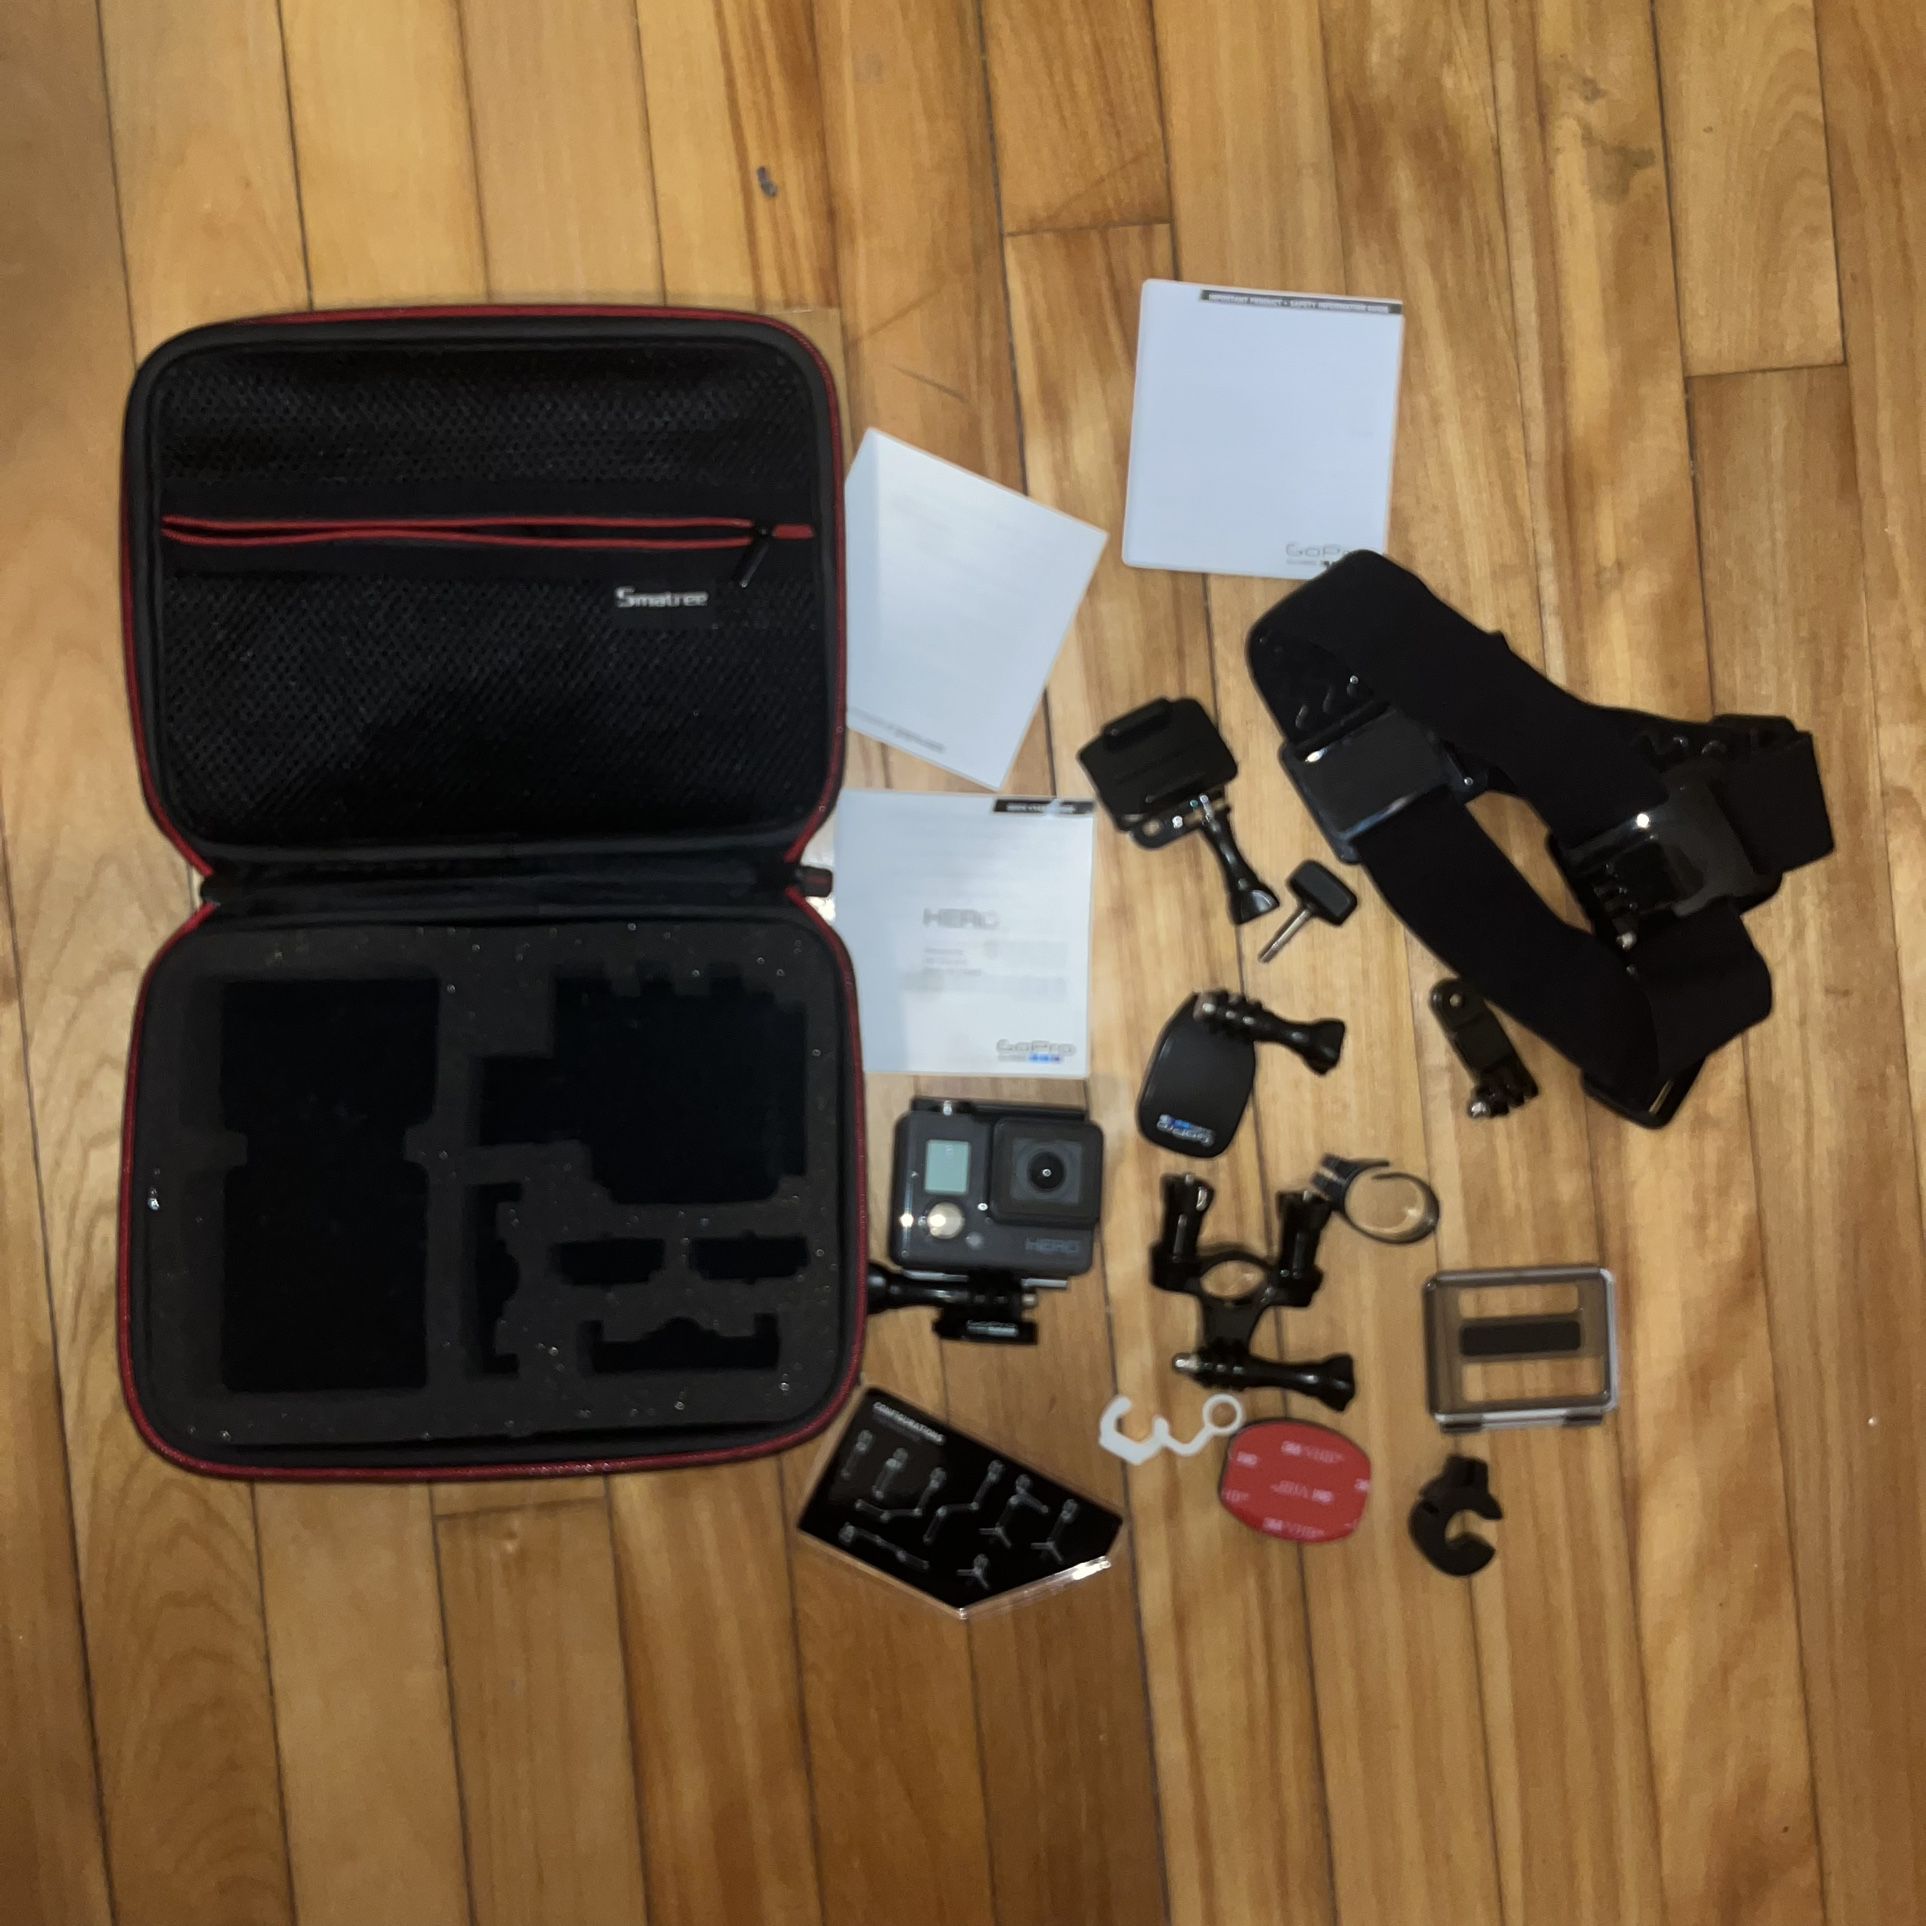 GoPro Hero Camera With Case, Strap, And Misc Accessories 